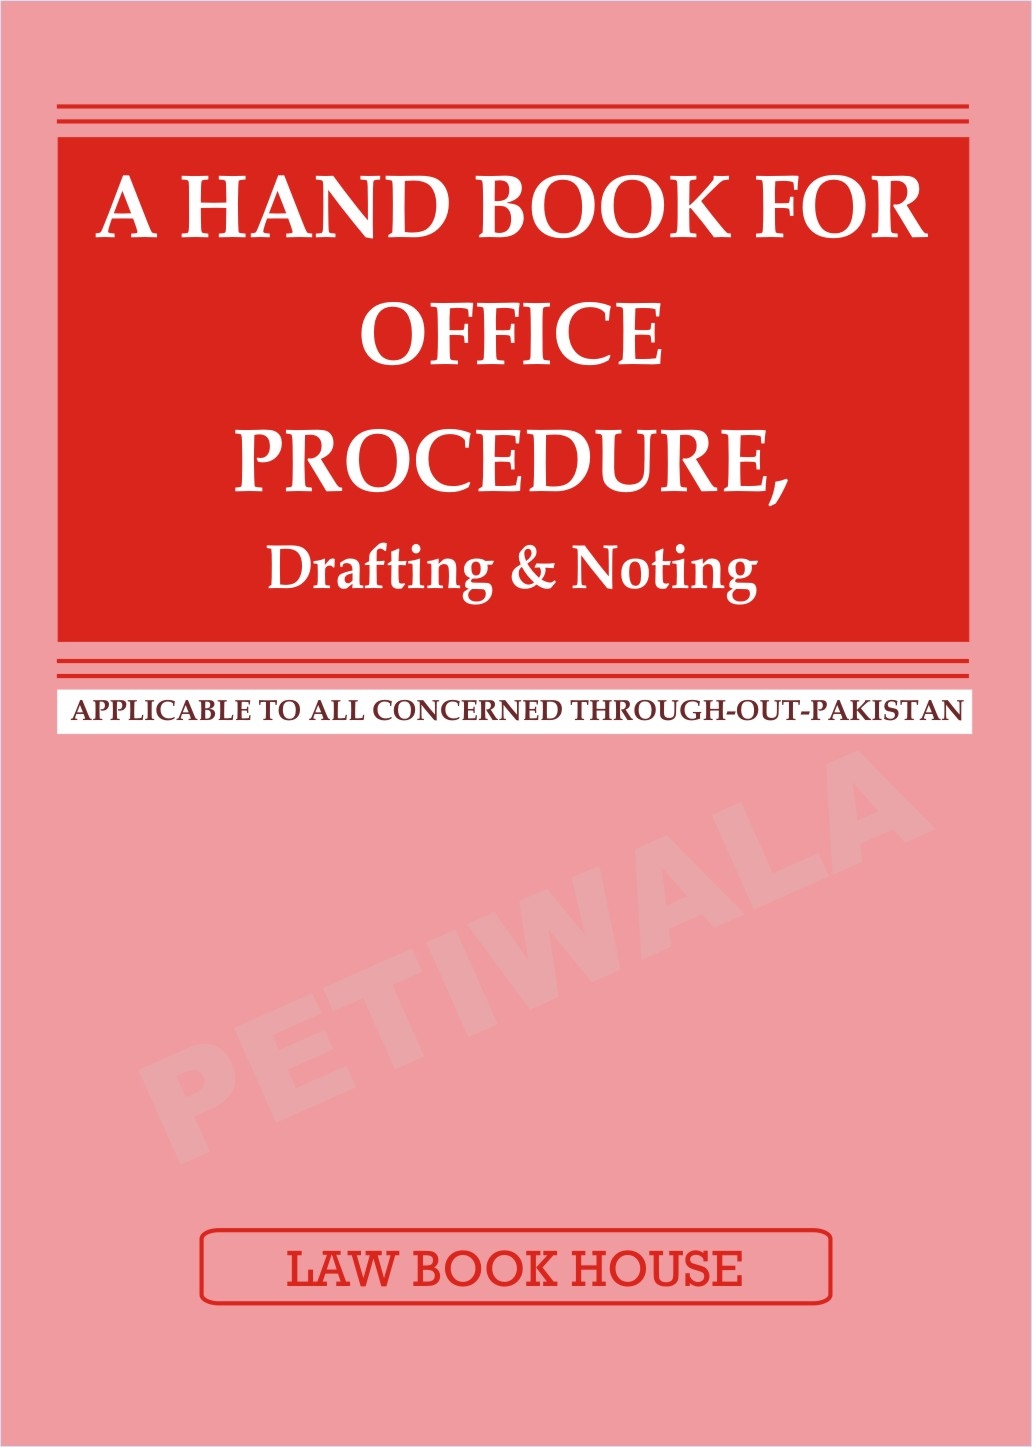 A Hand Book for Office Procedure, Drafting & Noting